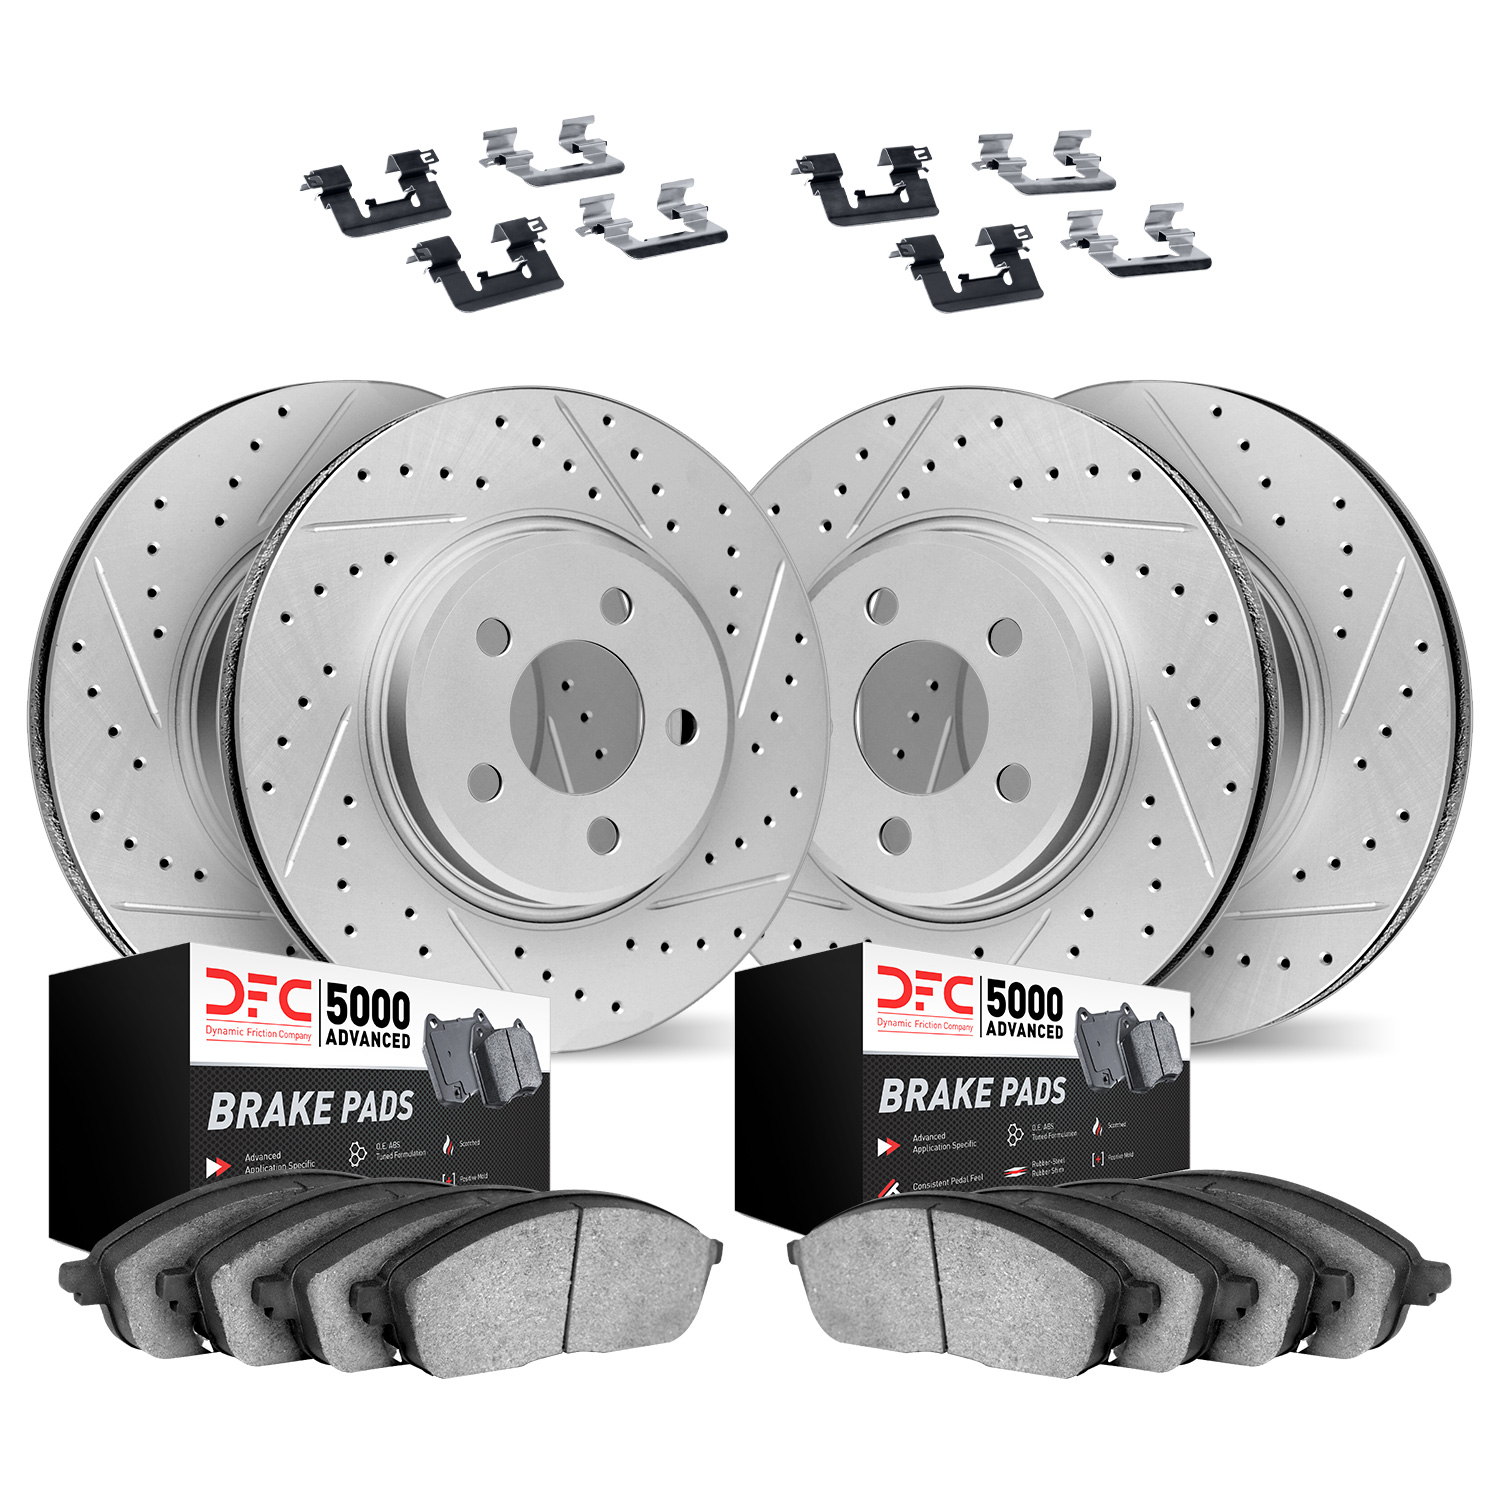 2514-31022 Geoperformance Drilled/Slotted Rotors w/5000 Advanced Brake Pads Kit & Hardware, 2007-2008 BMW, Position: Front and R